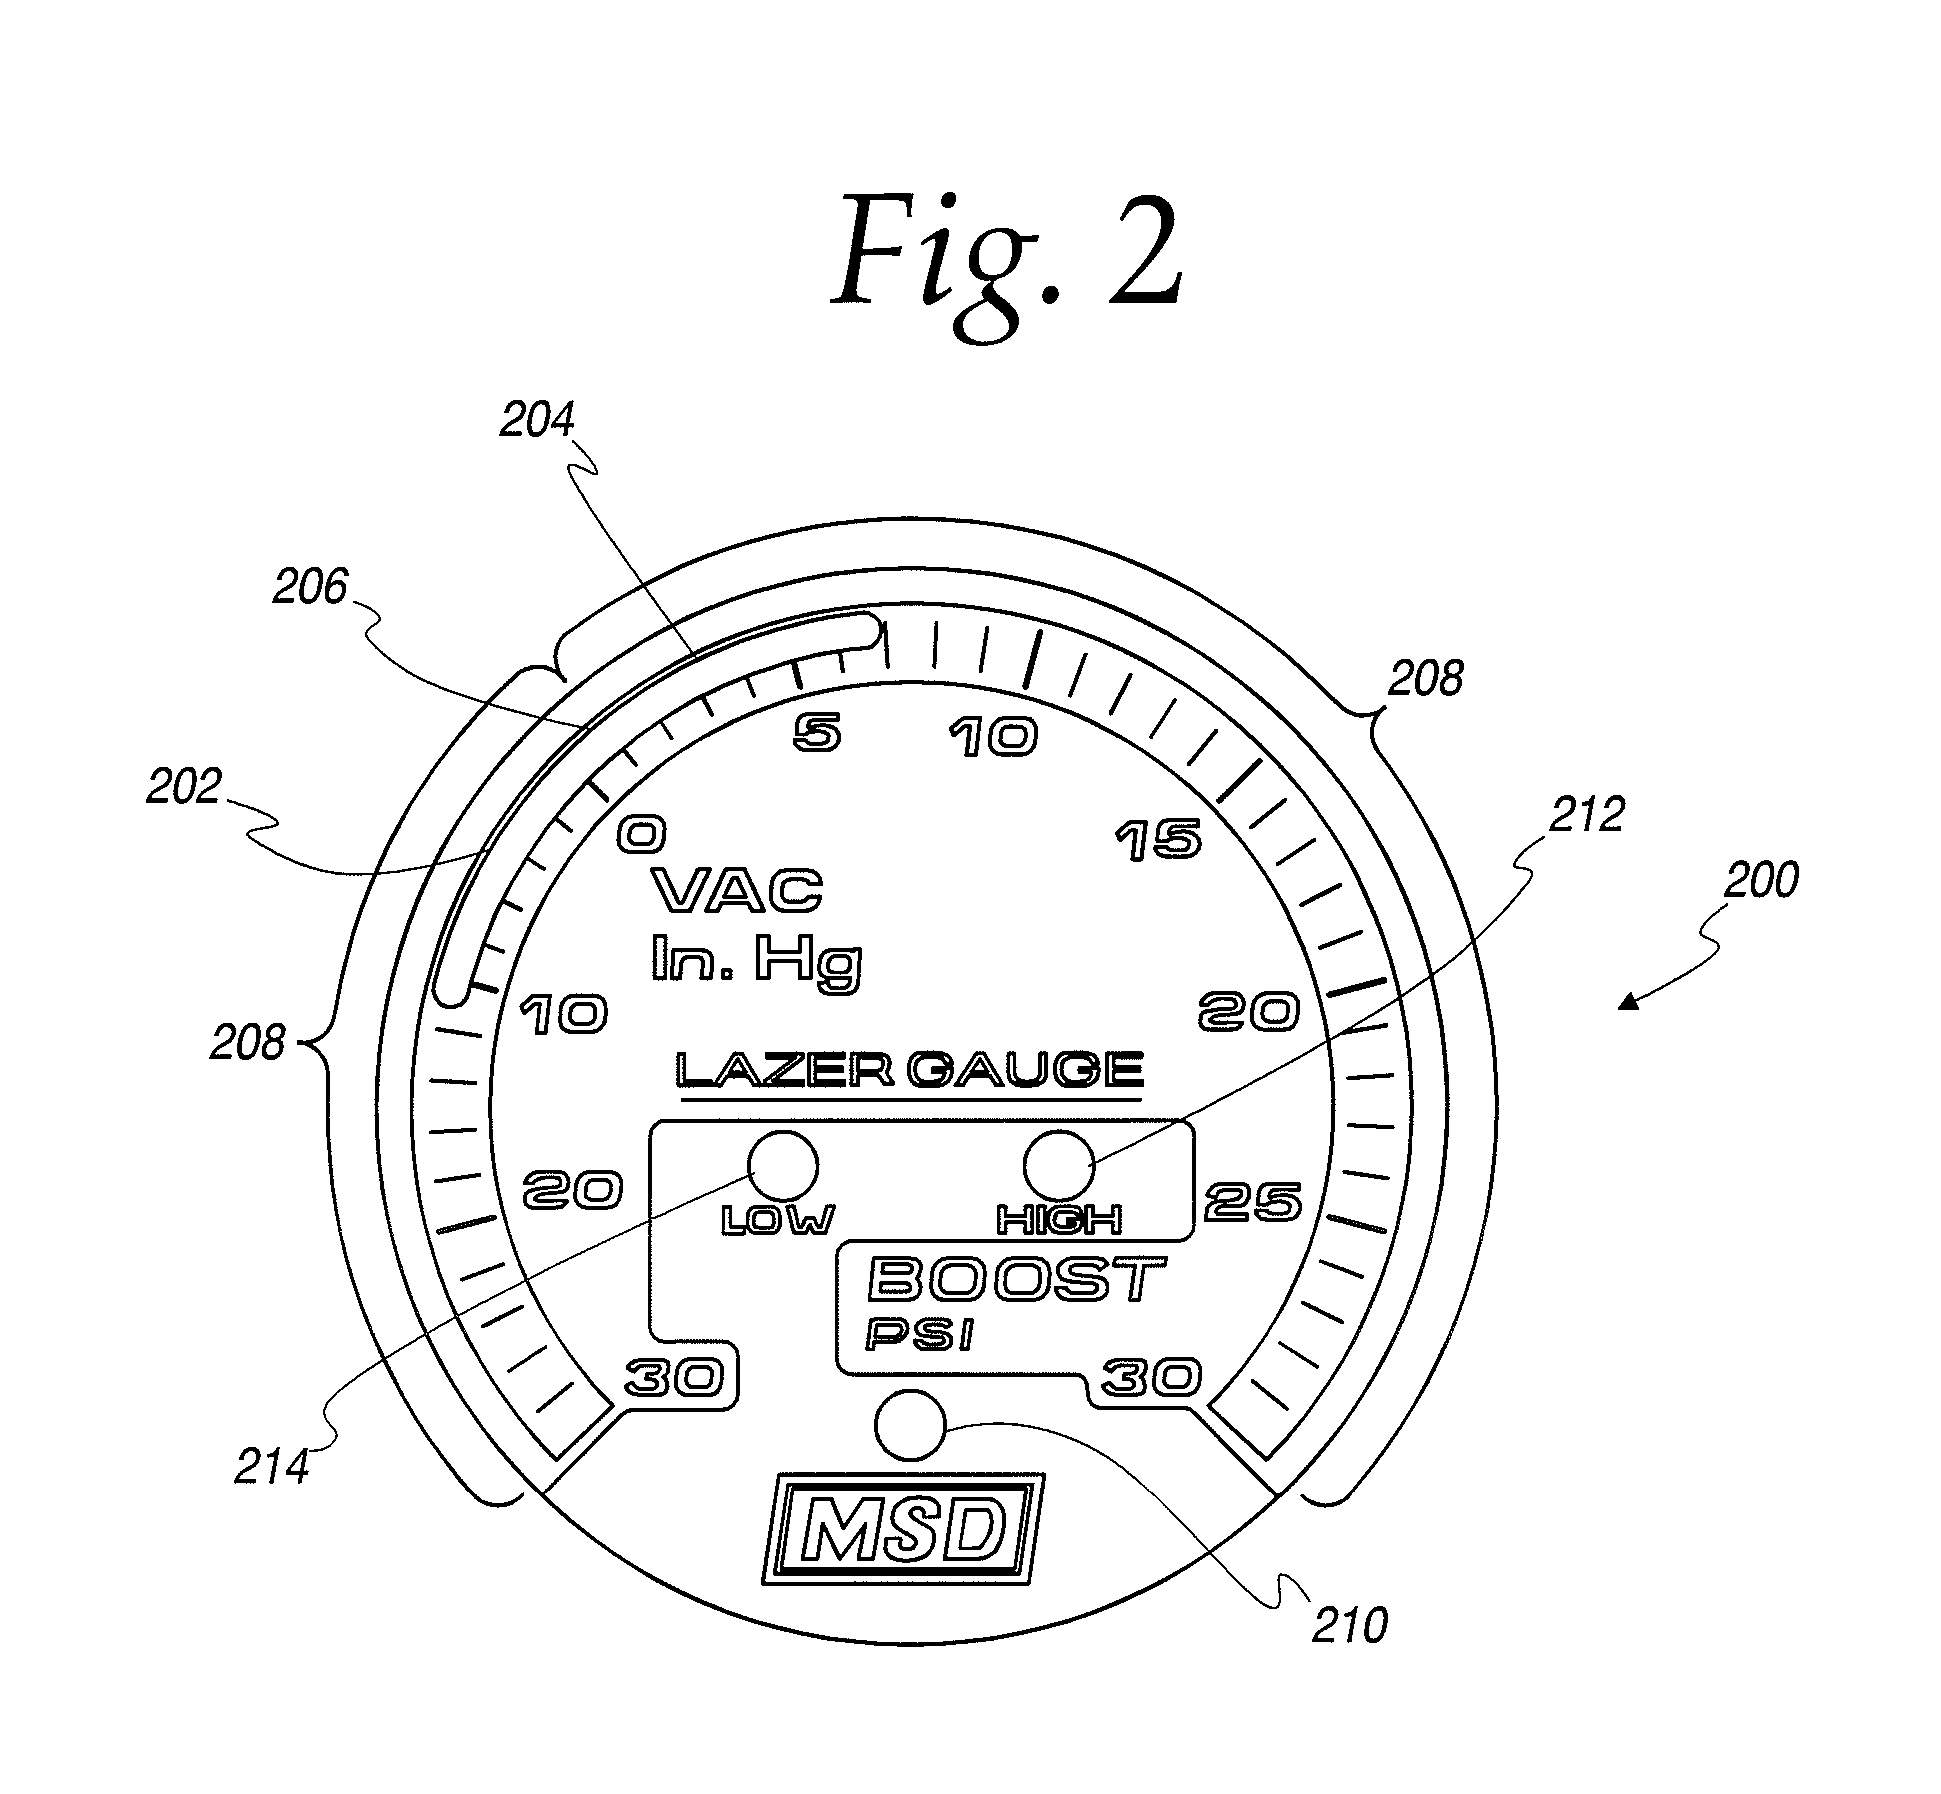 System and method for providing a vehicle display